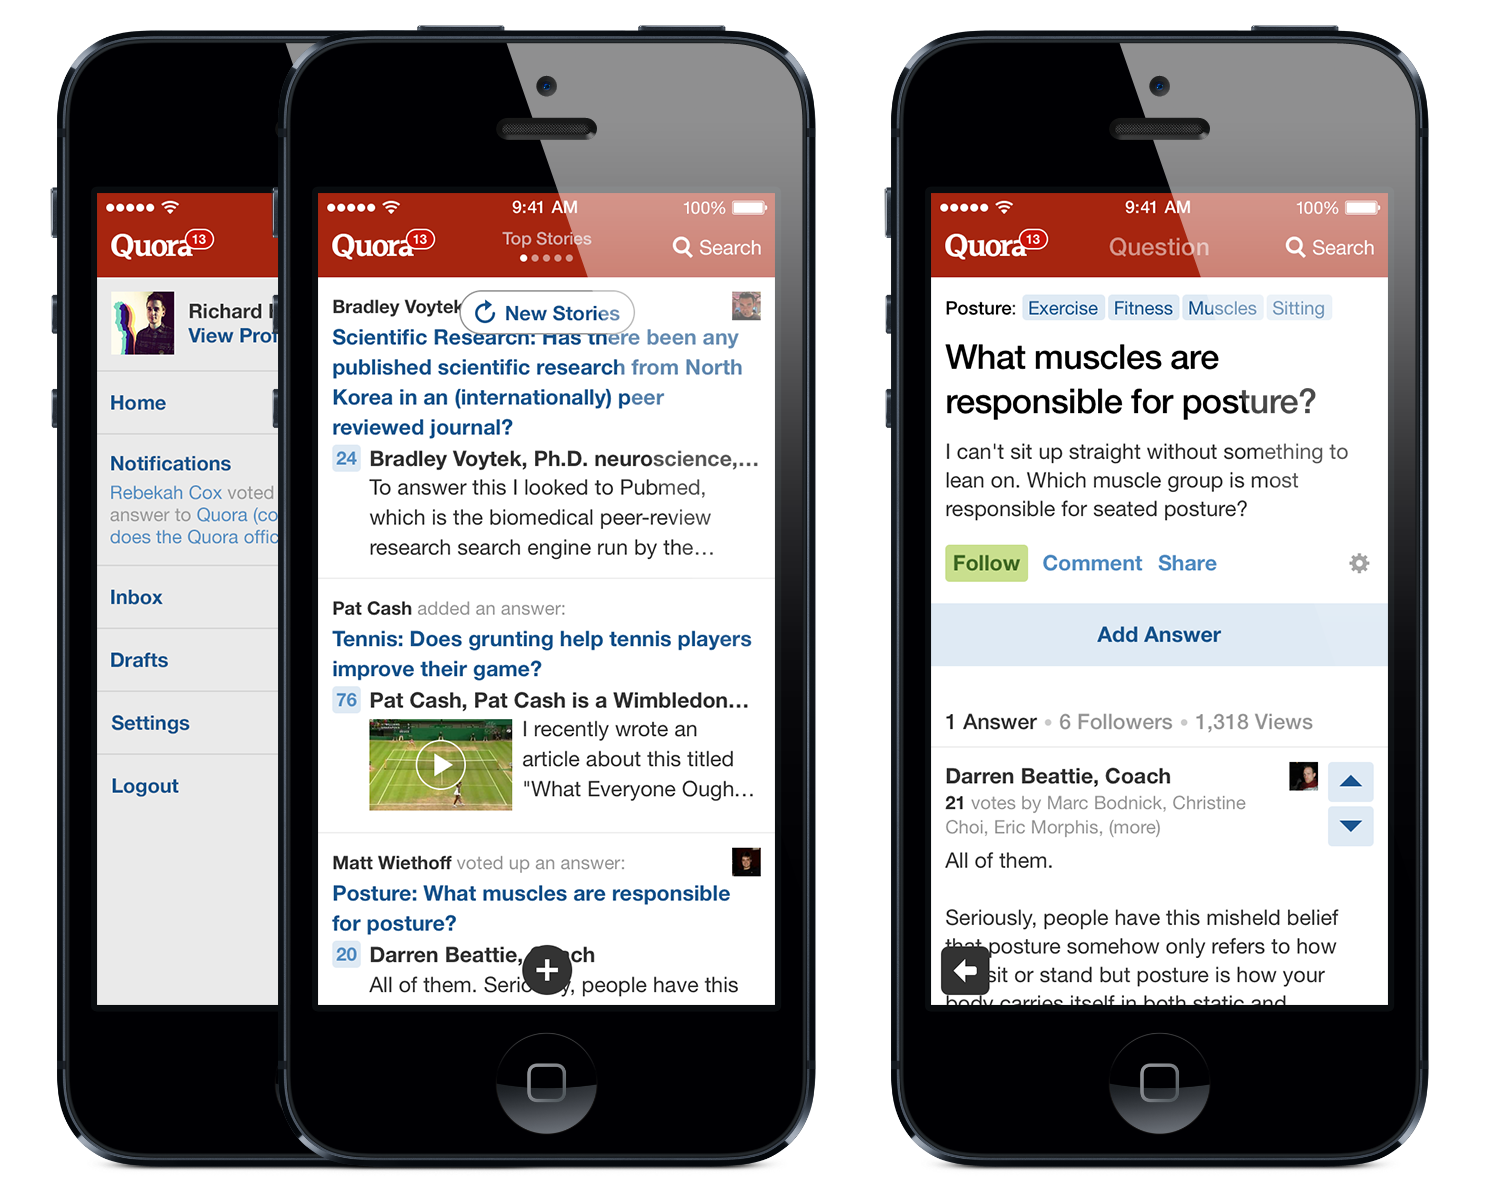 Quora Launches Ios 7 App Reveals Plans For Ipad Version This Year